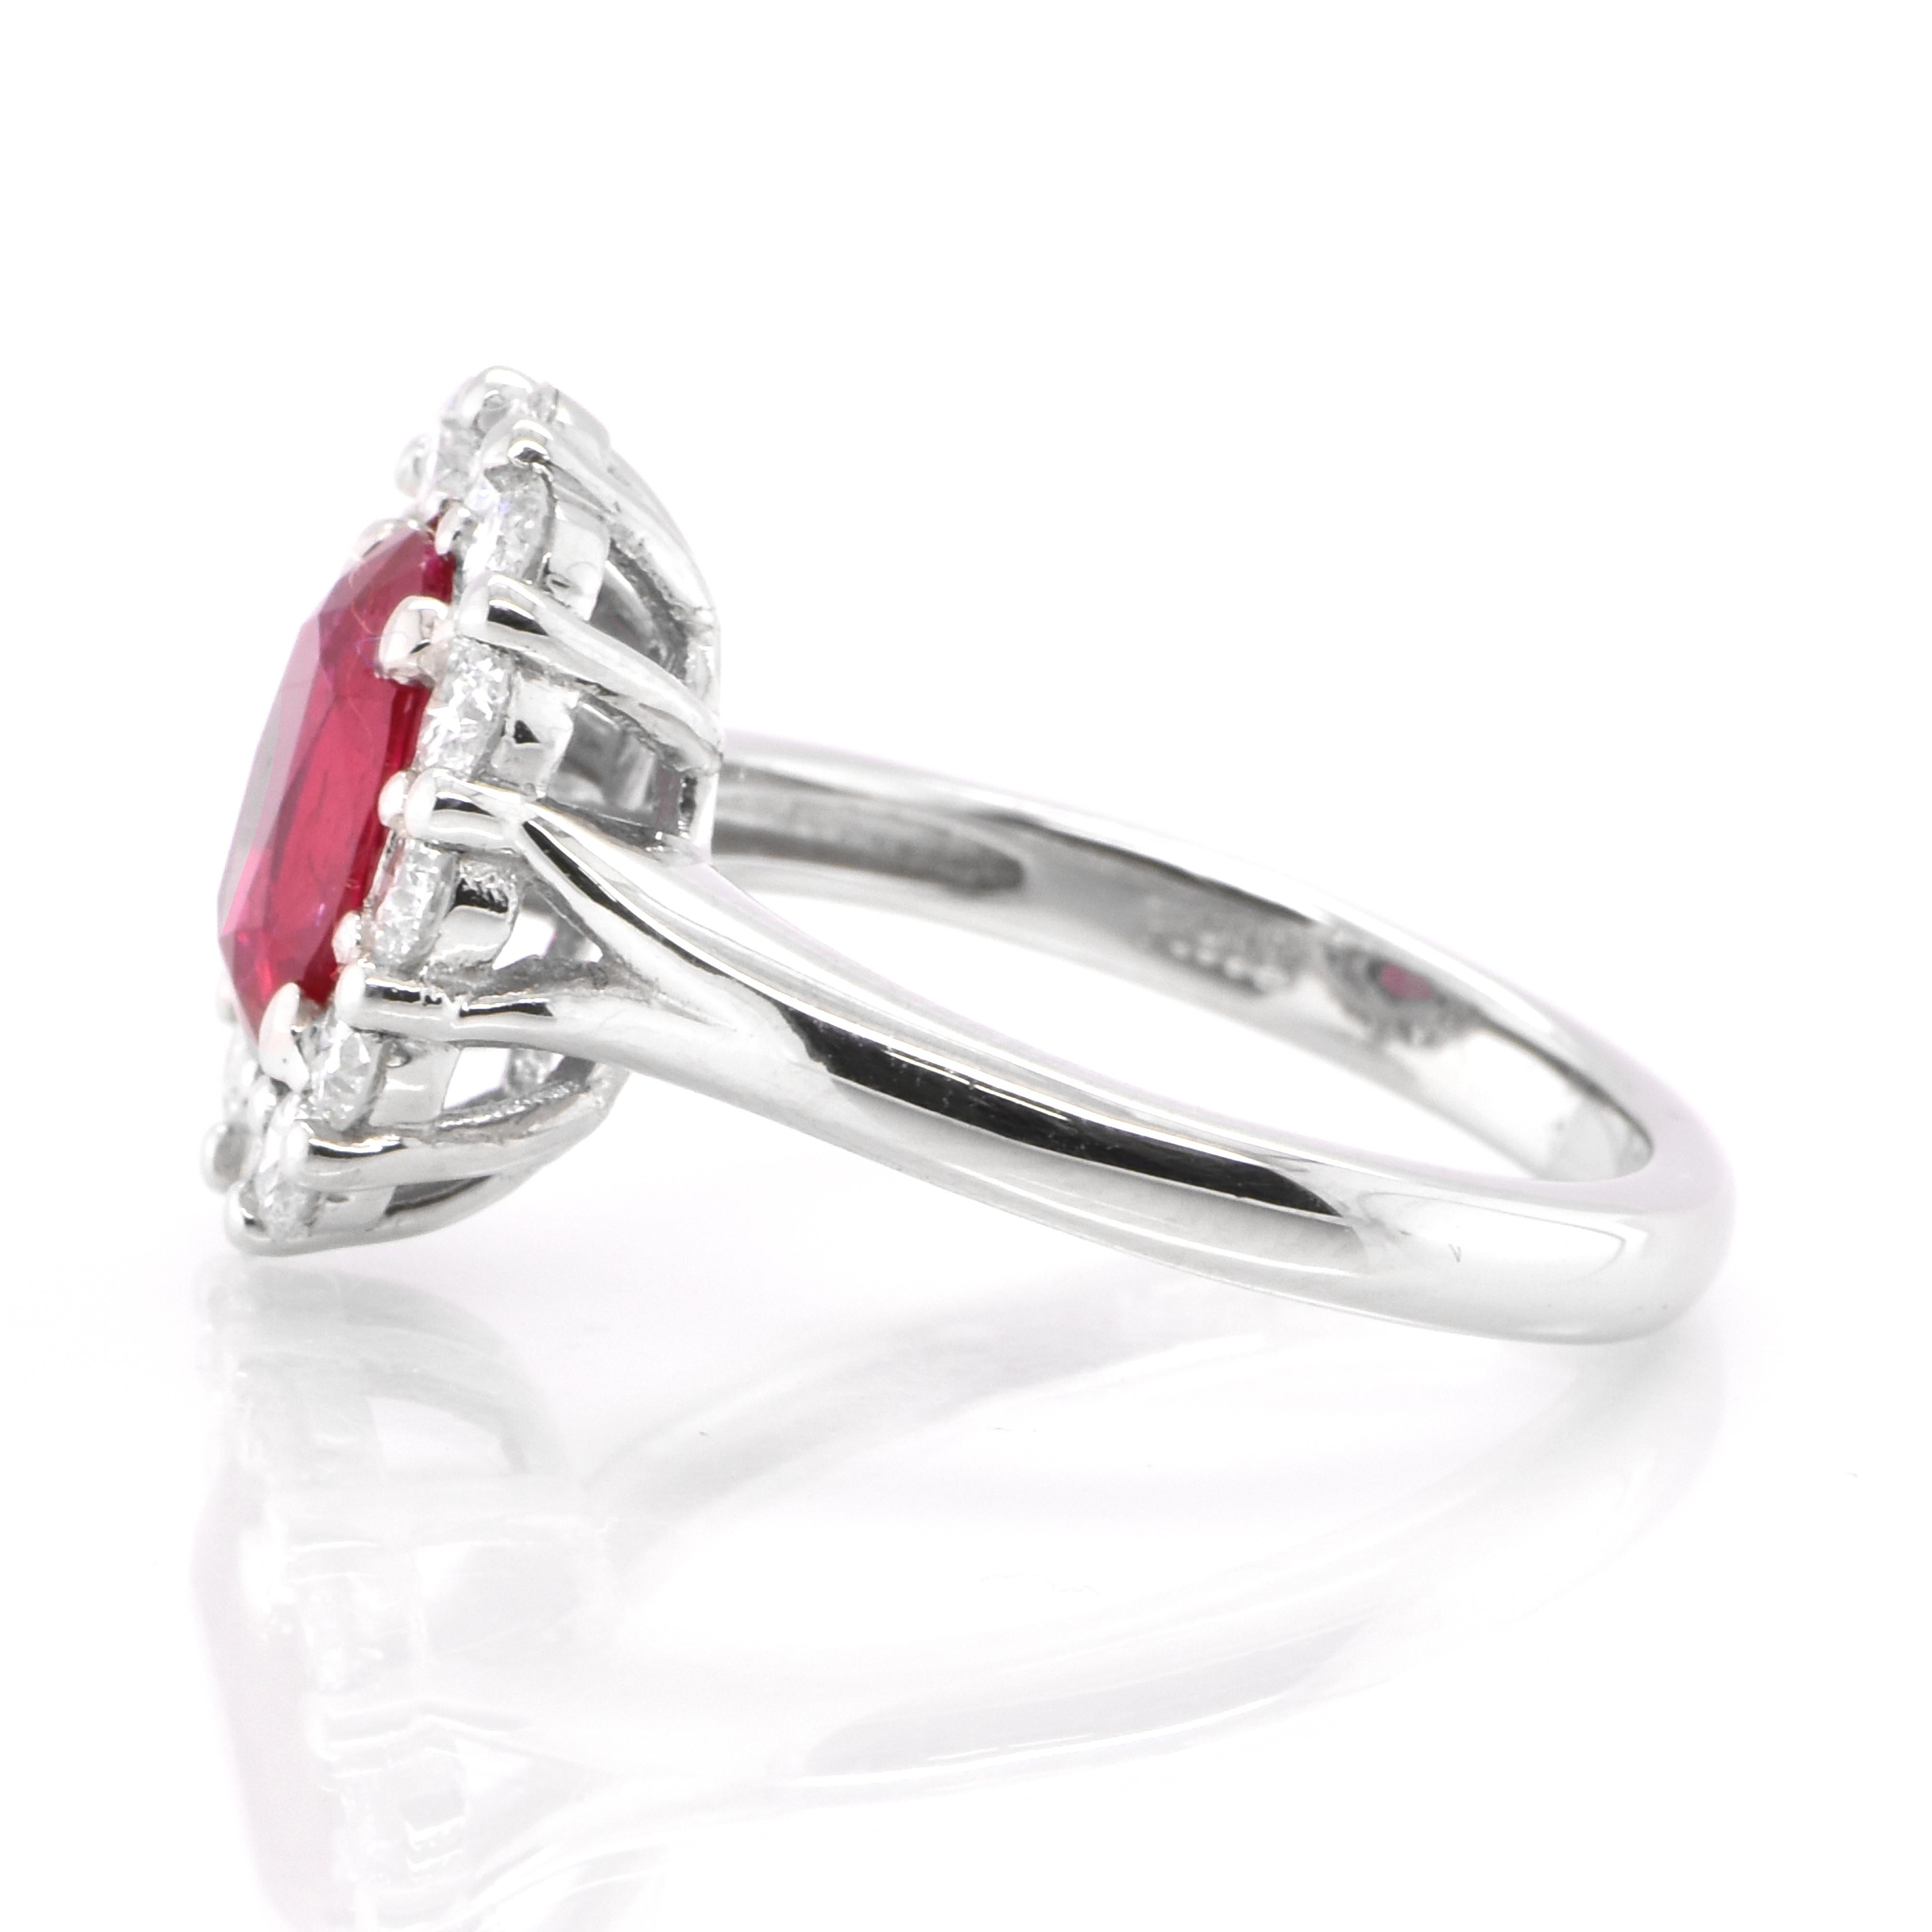 Oval Cut GRS Certified 1.51 Carat Unheated Pigeon's Blood Color Ruby Ring Set in Platinum